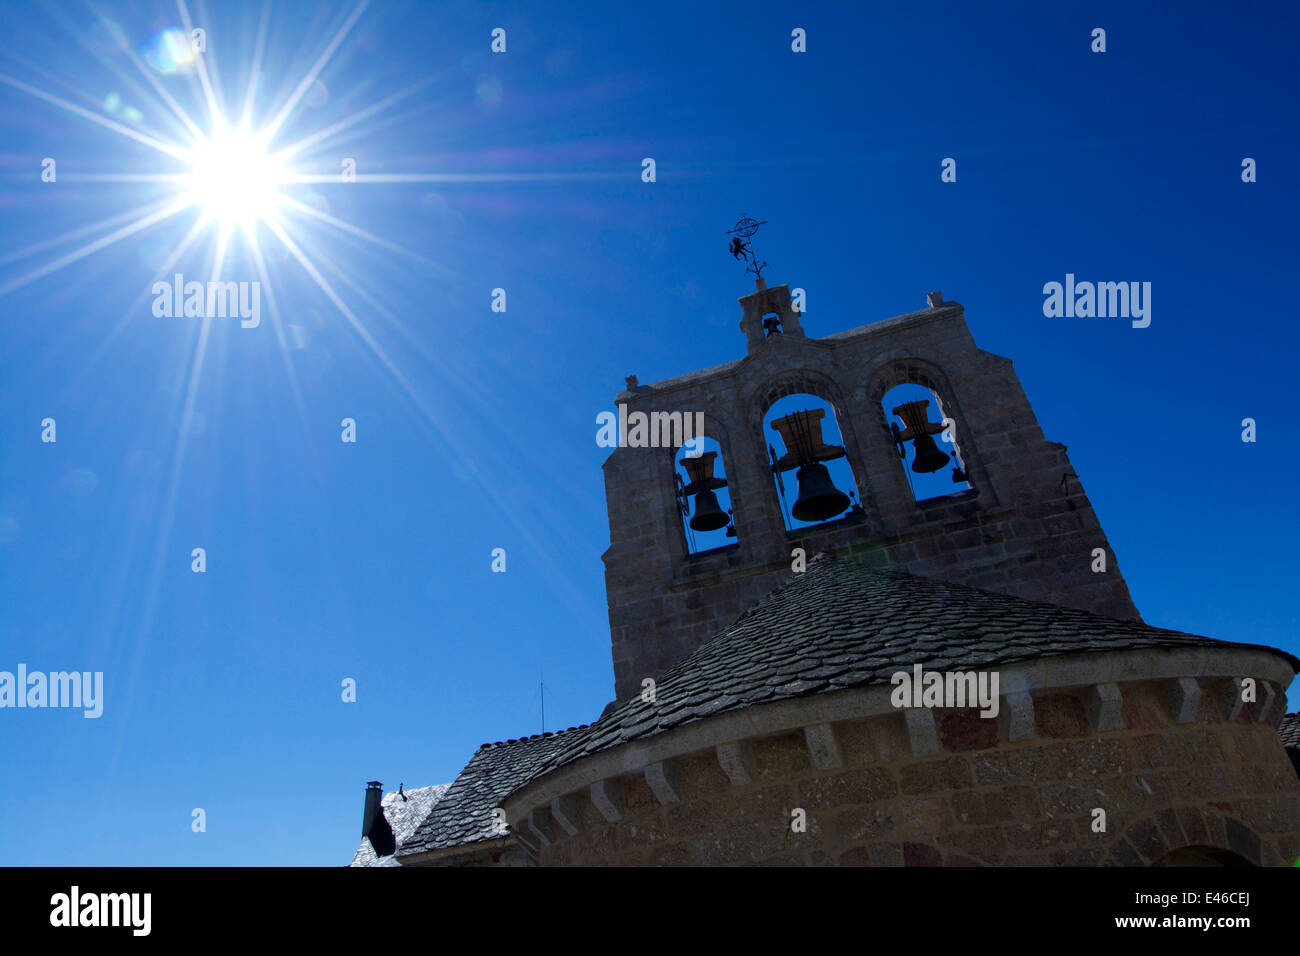 Bell tower of the Church of Saint Alban sur Limagnole, Gevaudan, Margeride, Lozere, France, Europe Stock Photo